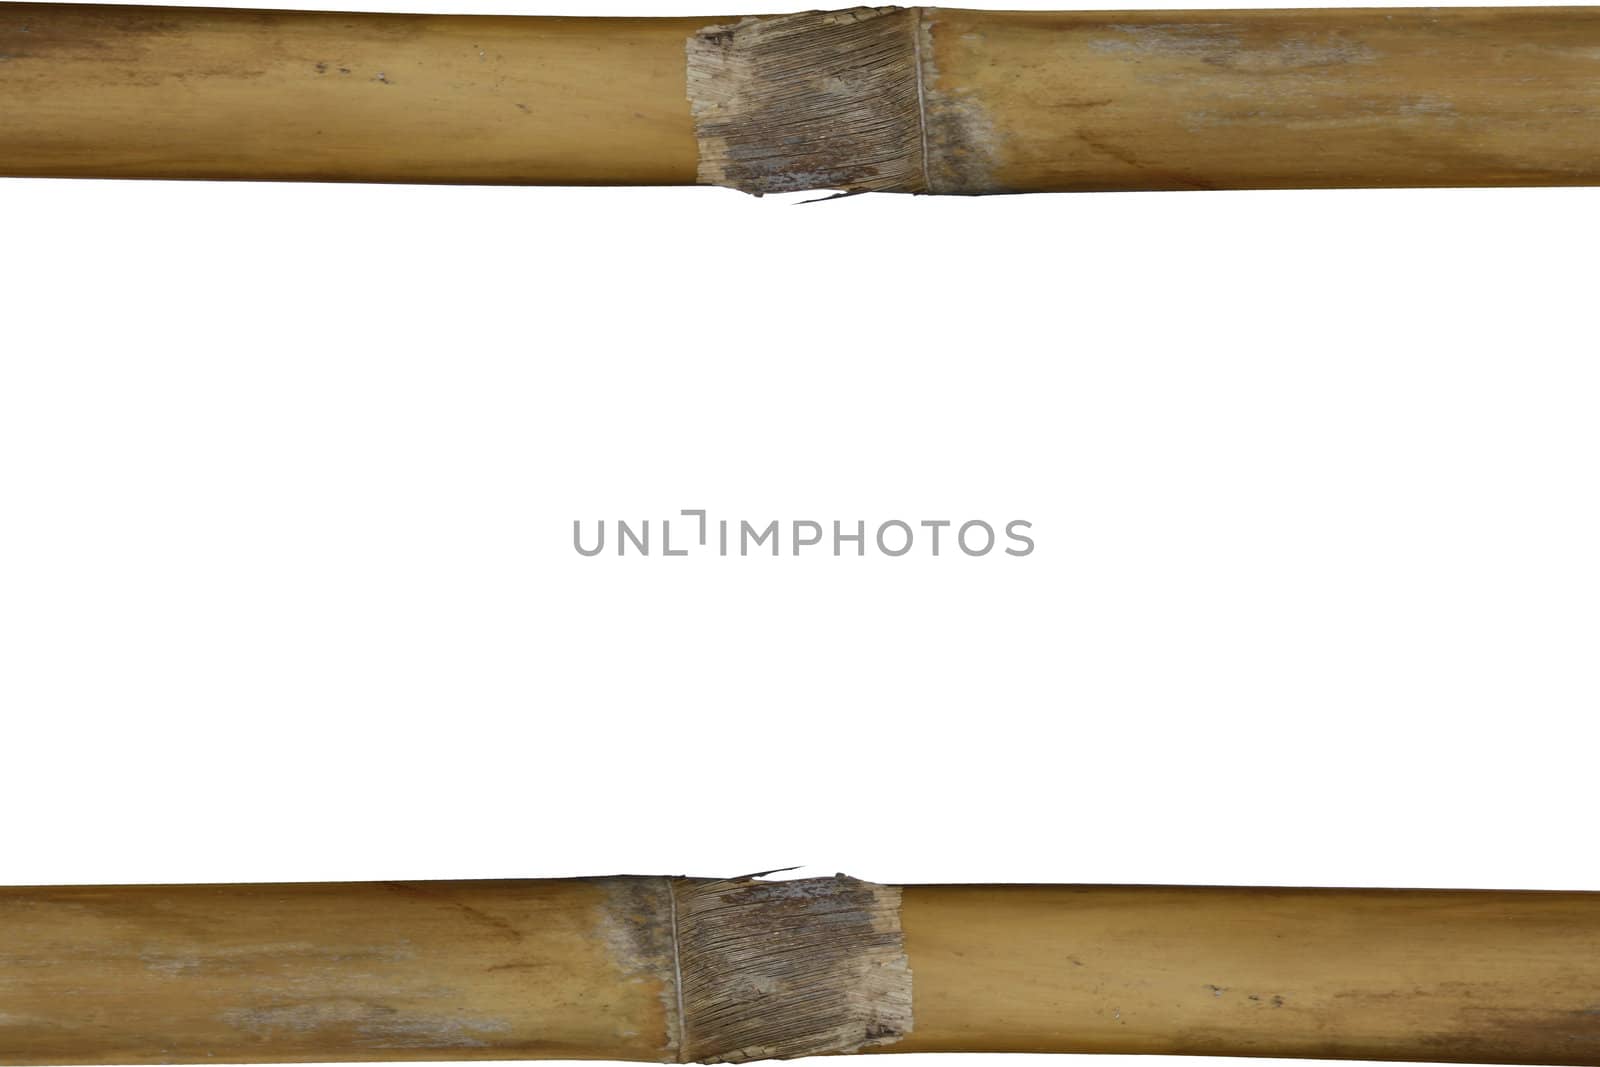 The natural bamboo frame. A white background.